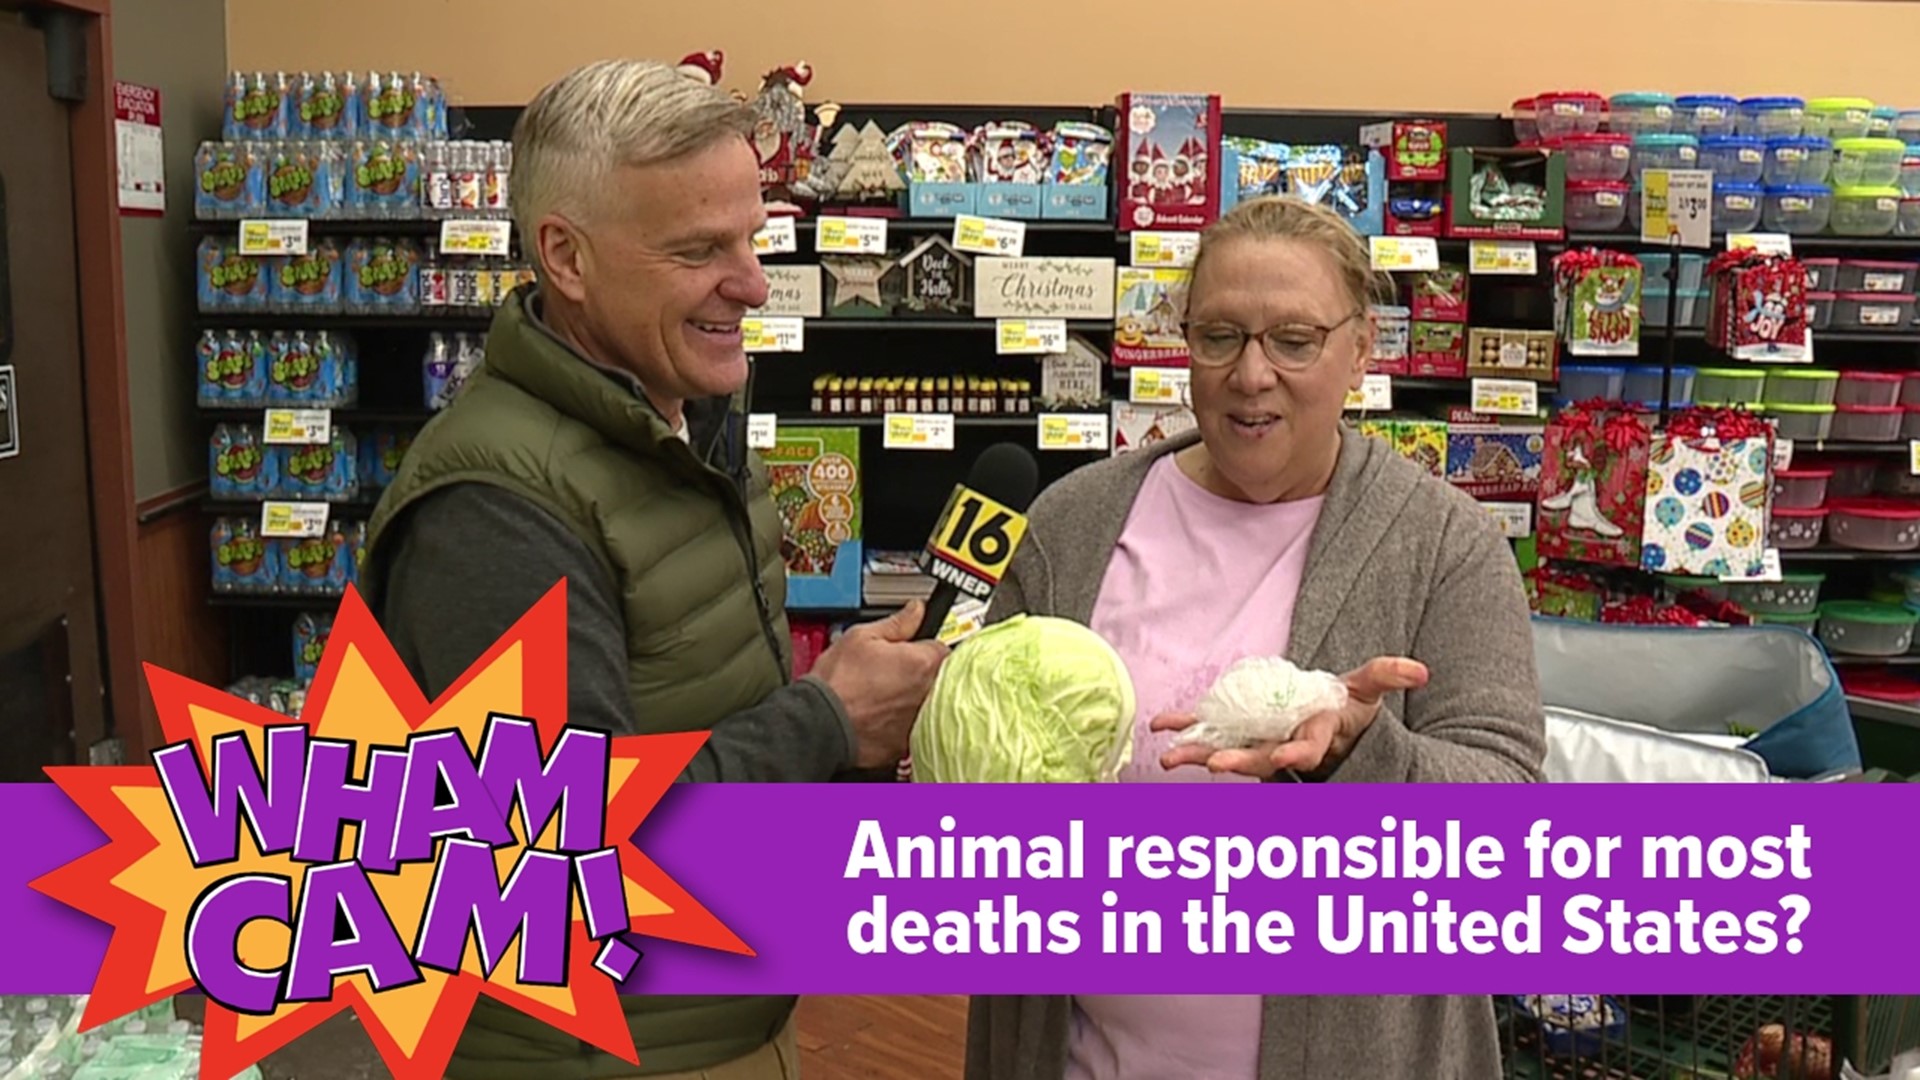 Ever wonder what animal causes the most deaths in the United States? As always, Joe Snedeker has the answer in this week's Wham Cam.